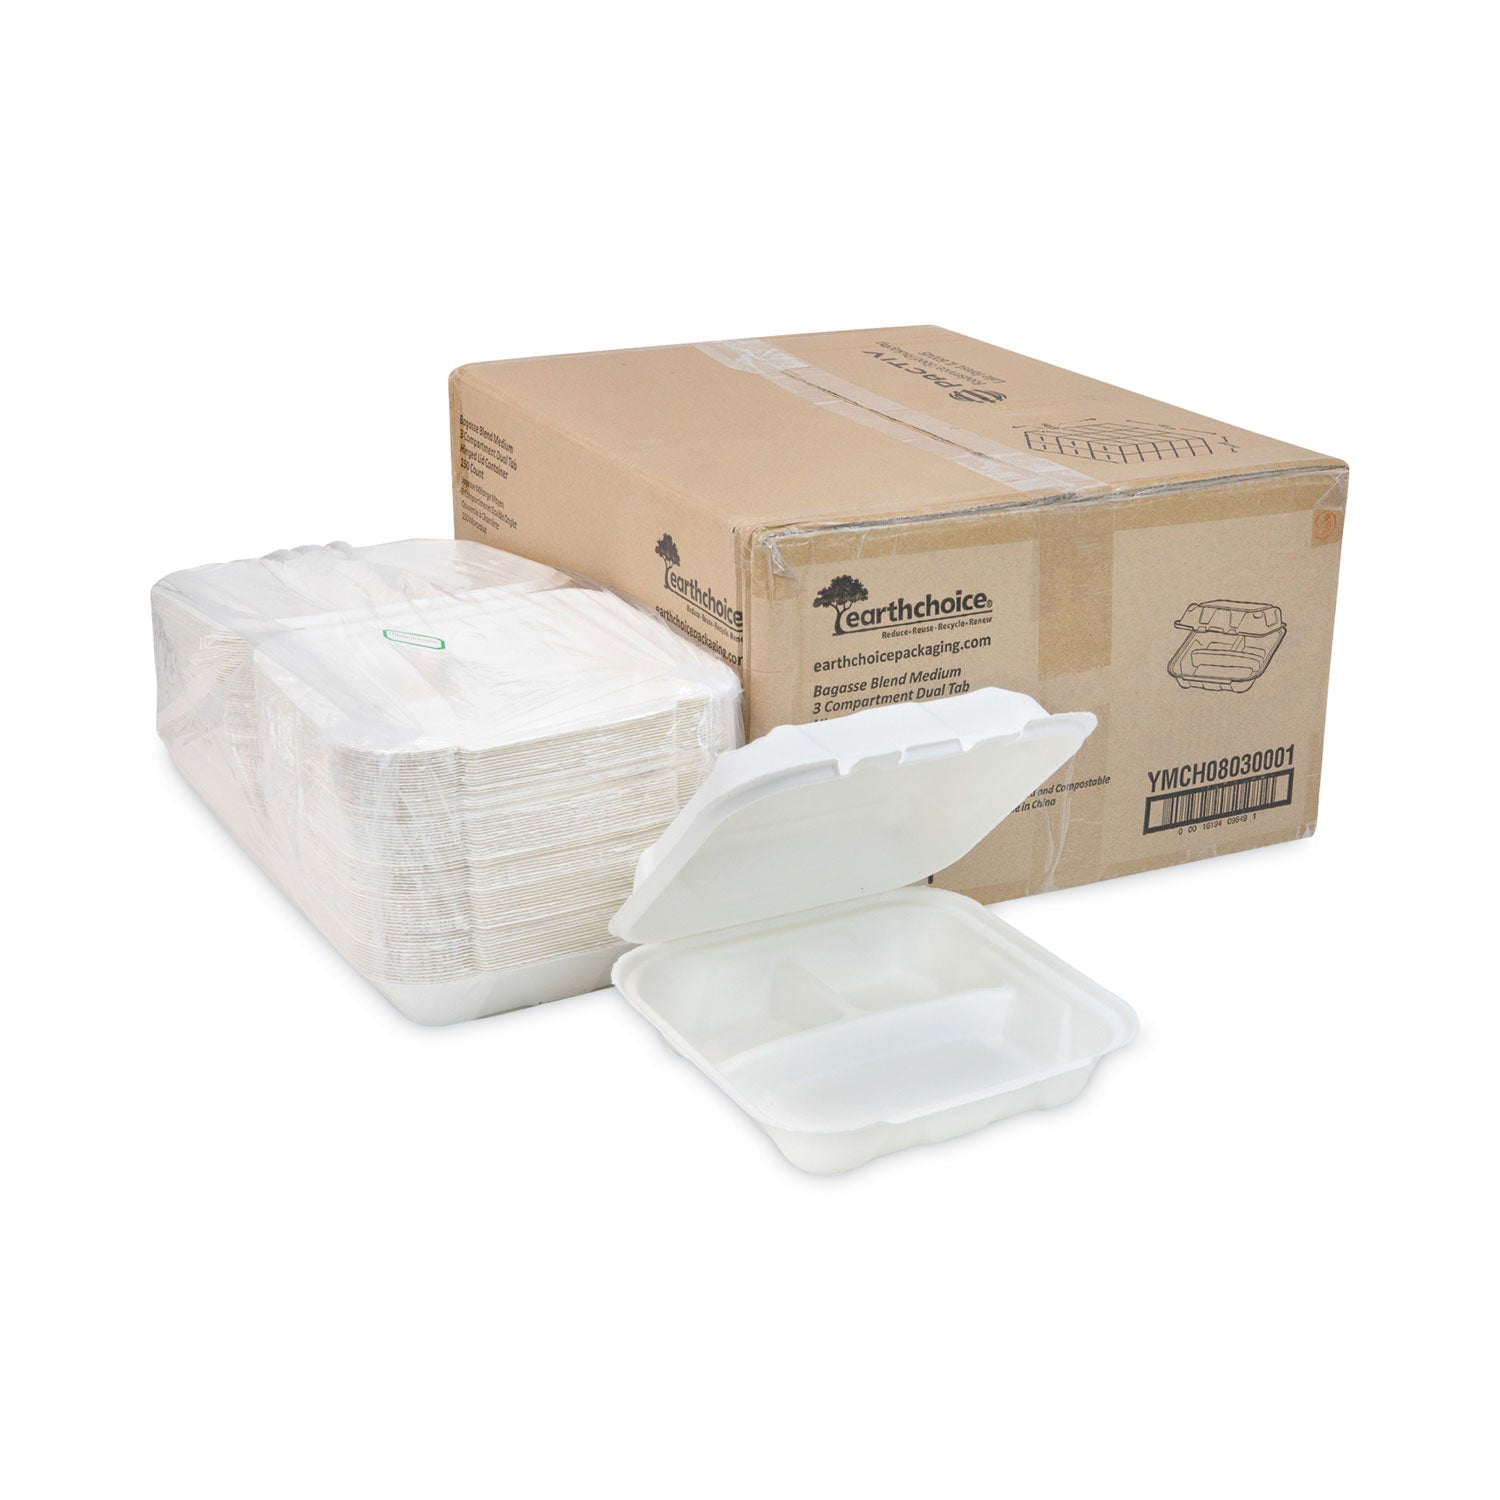 earthchoice-bagasse-hinged-lid-container-3-compartment-dual-tab-lock-78-x-78-x-28-natural-sugarcane-150-carton_pctymch08030001 - 4